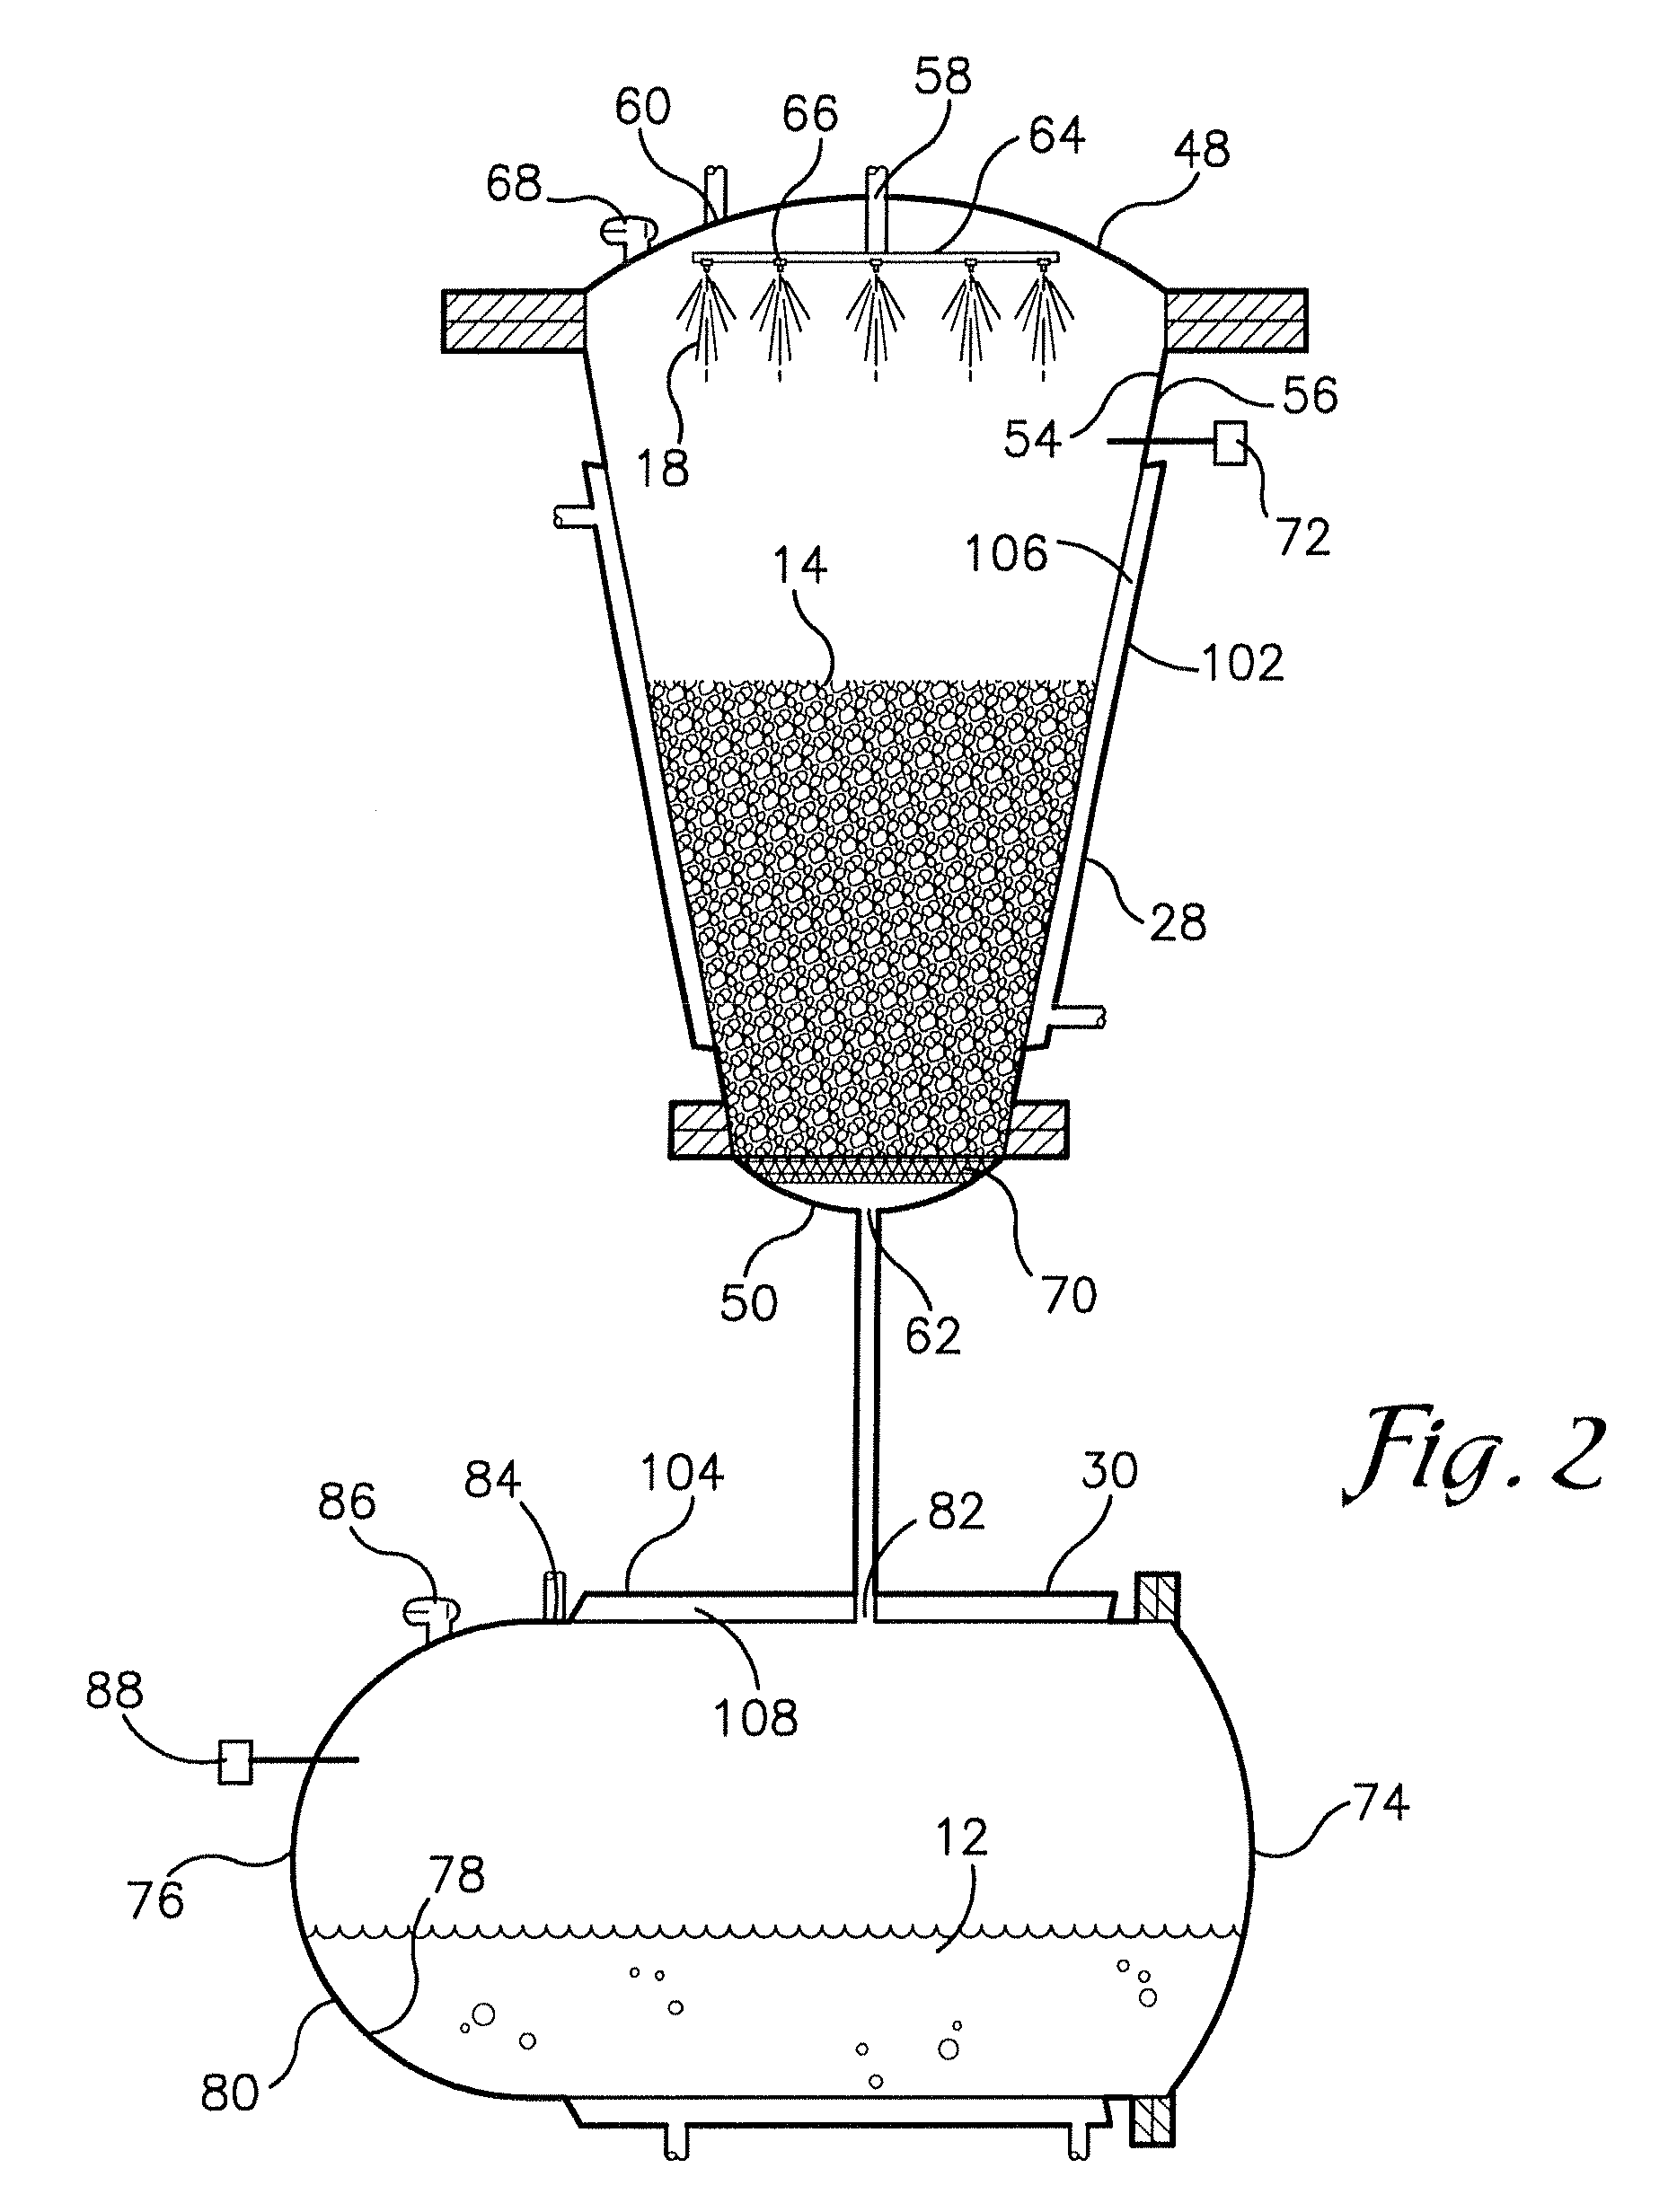 Apparatus and method for oil and fat extraction